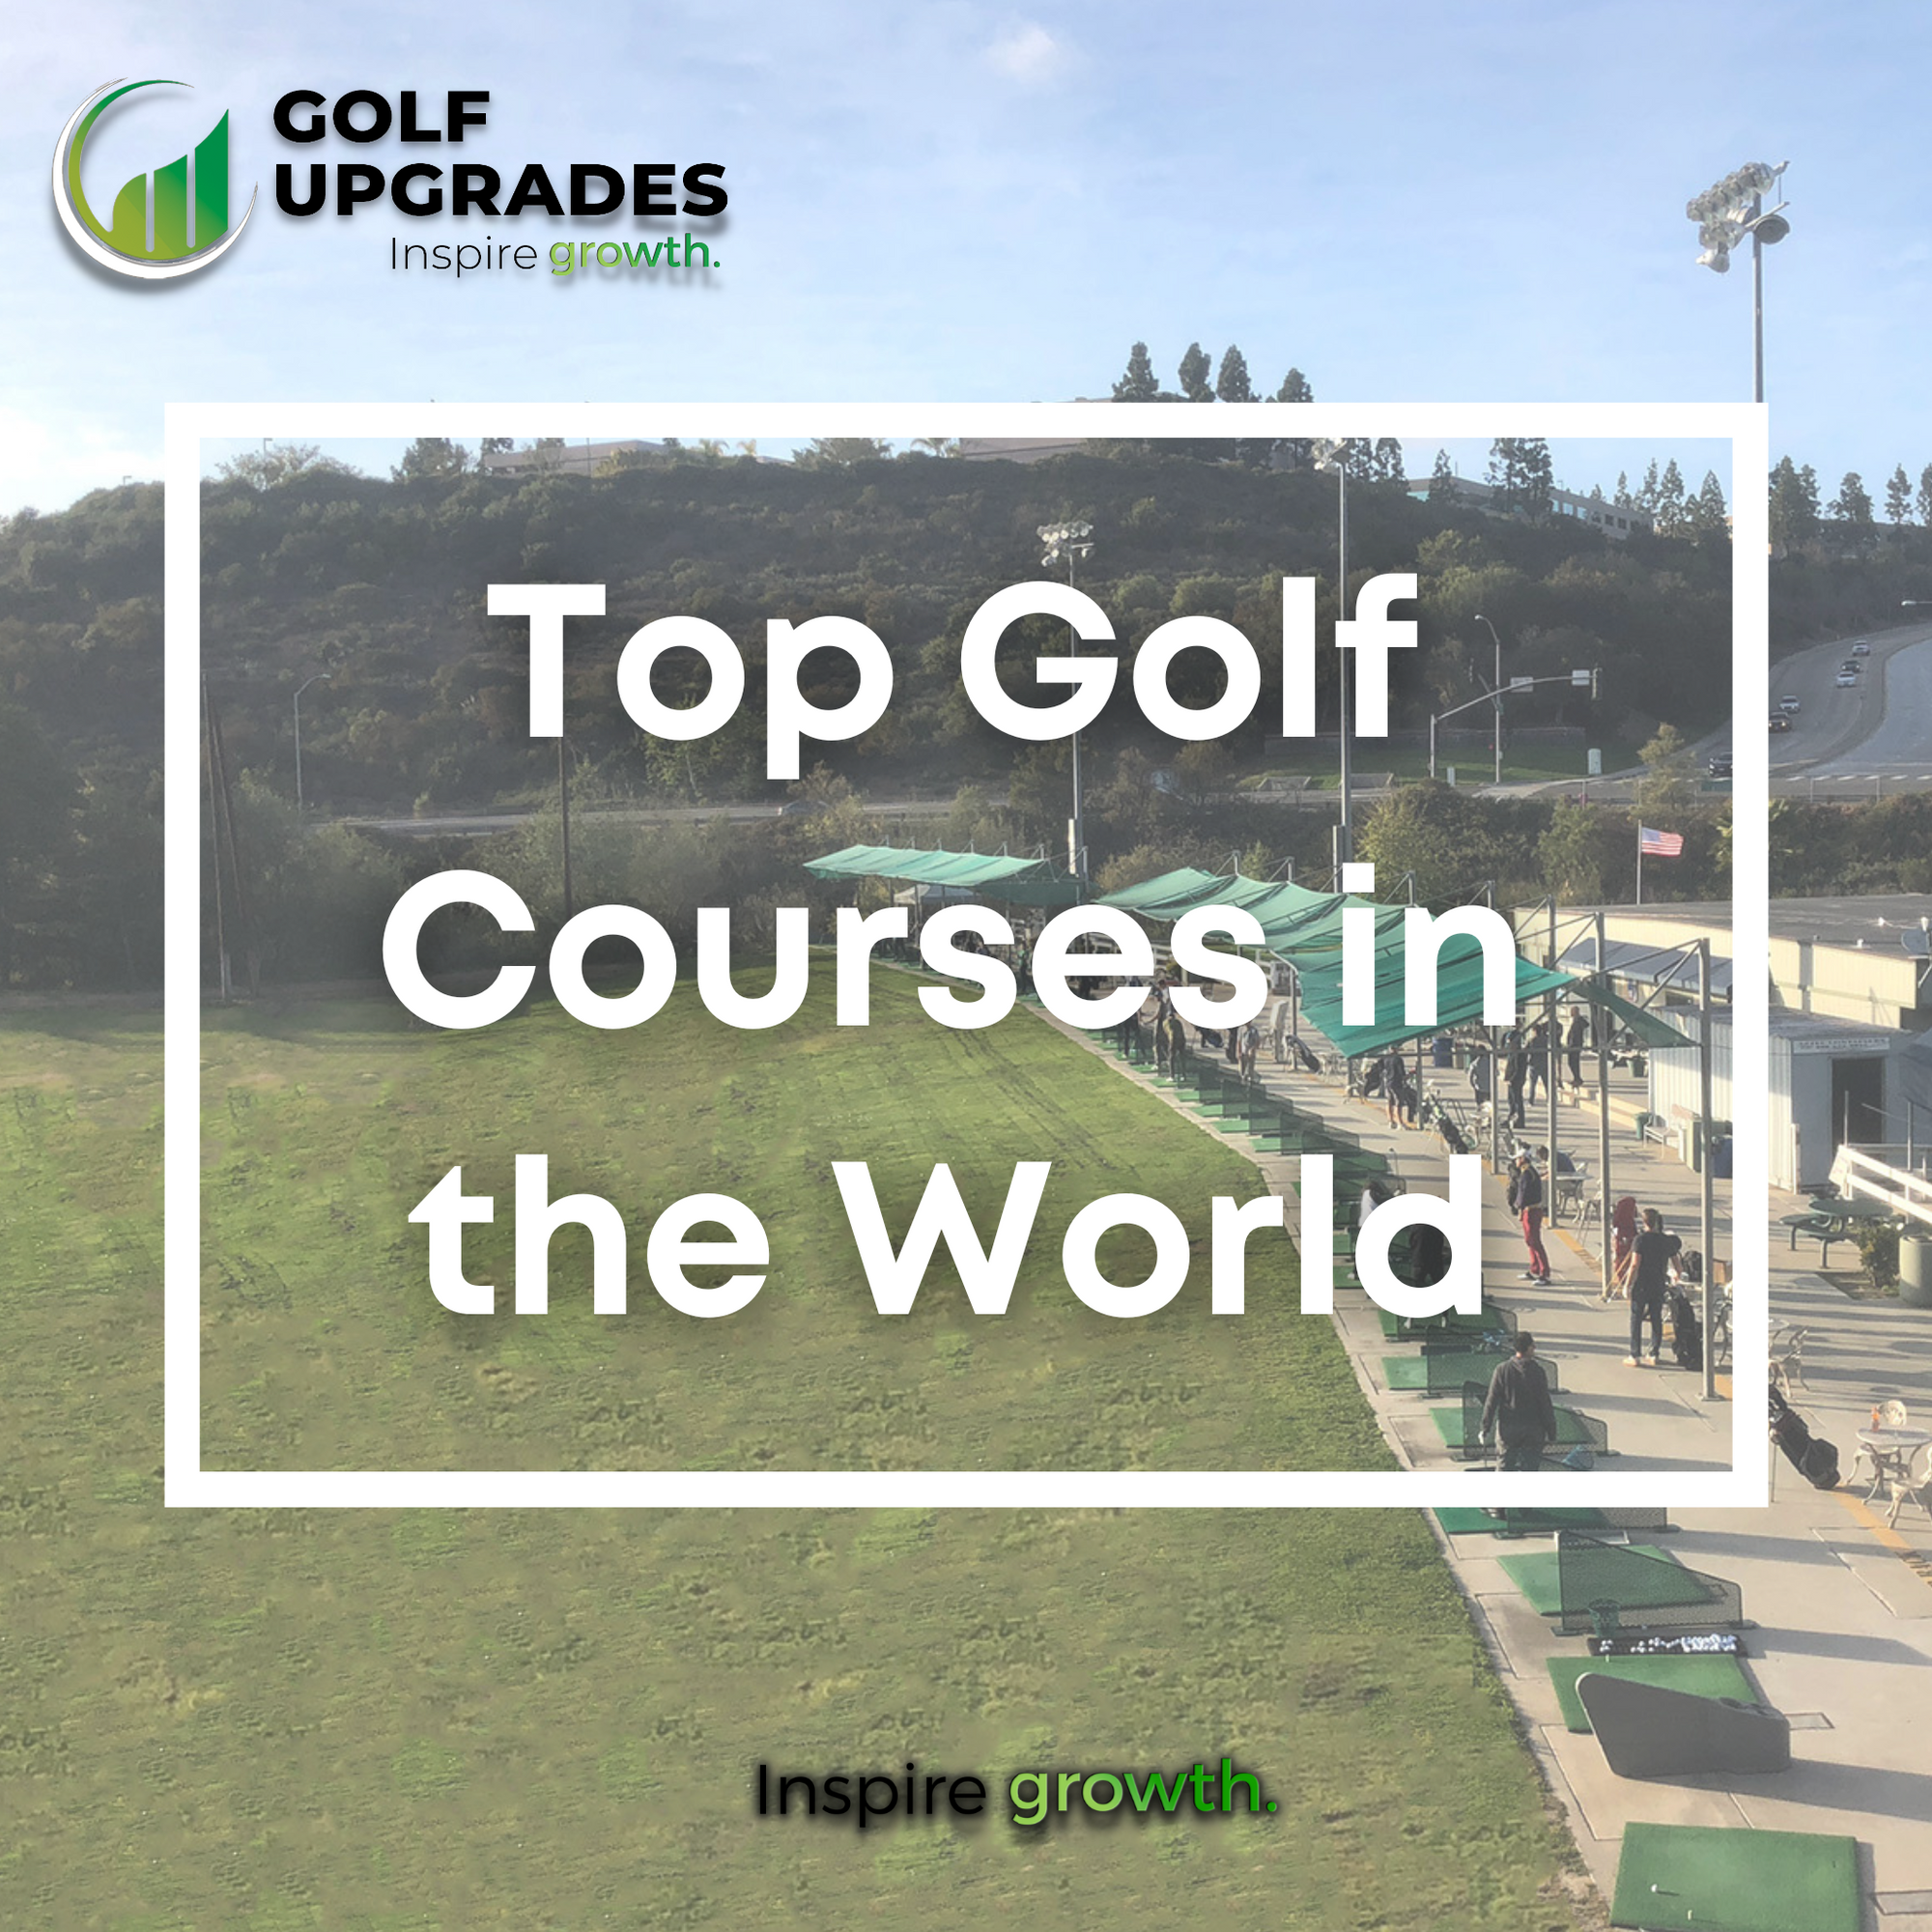 Top Golf Courses in the World | Golf Upgrades